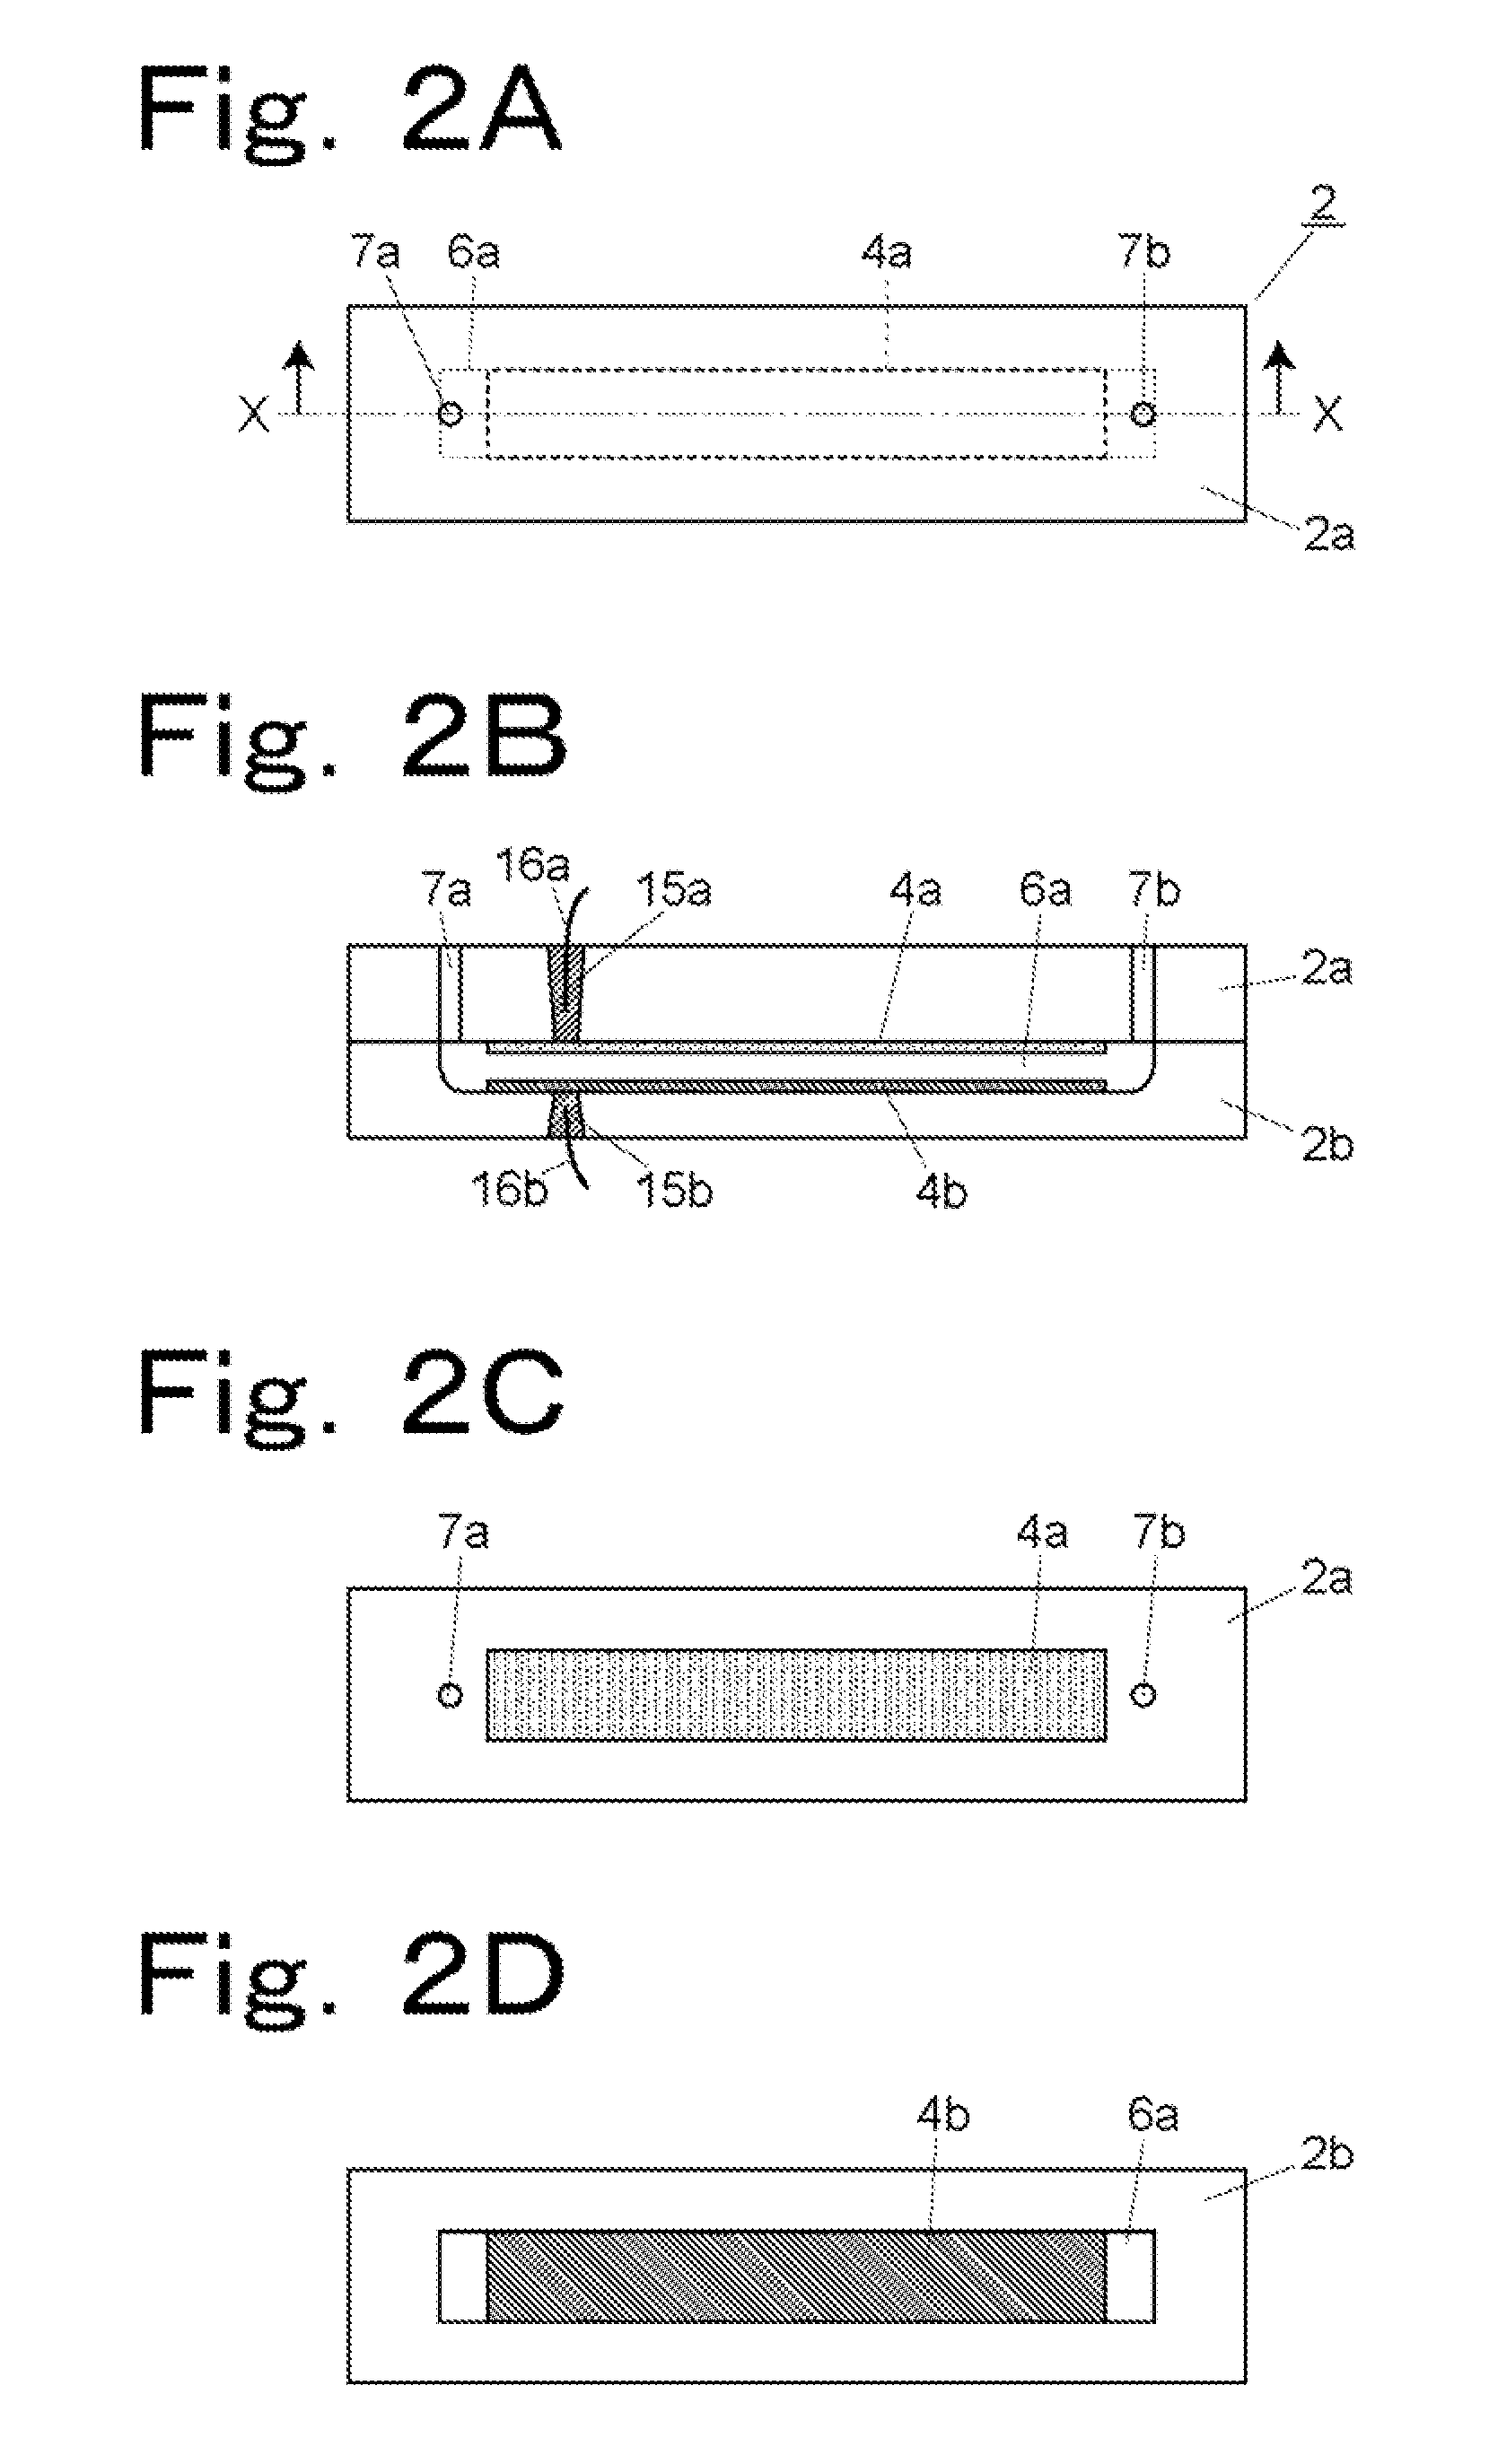 Flow cell, apparatus for concentrating radioactive fluoride anion, and method of concentrating radioactive fluoride anion